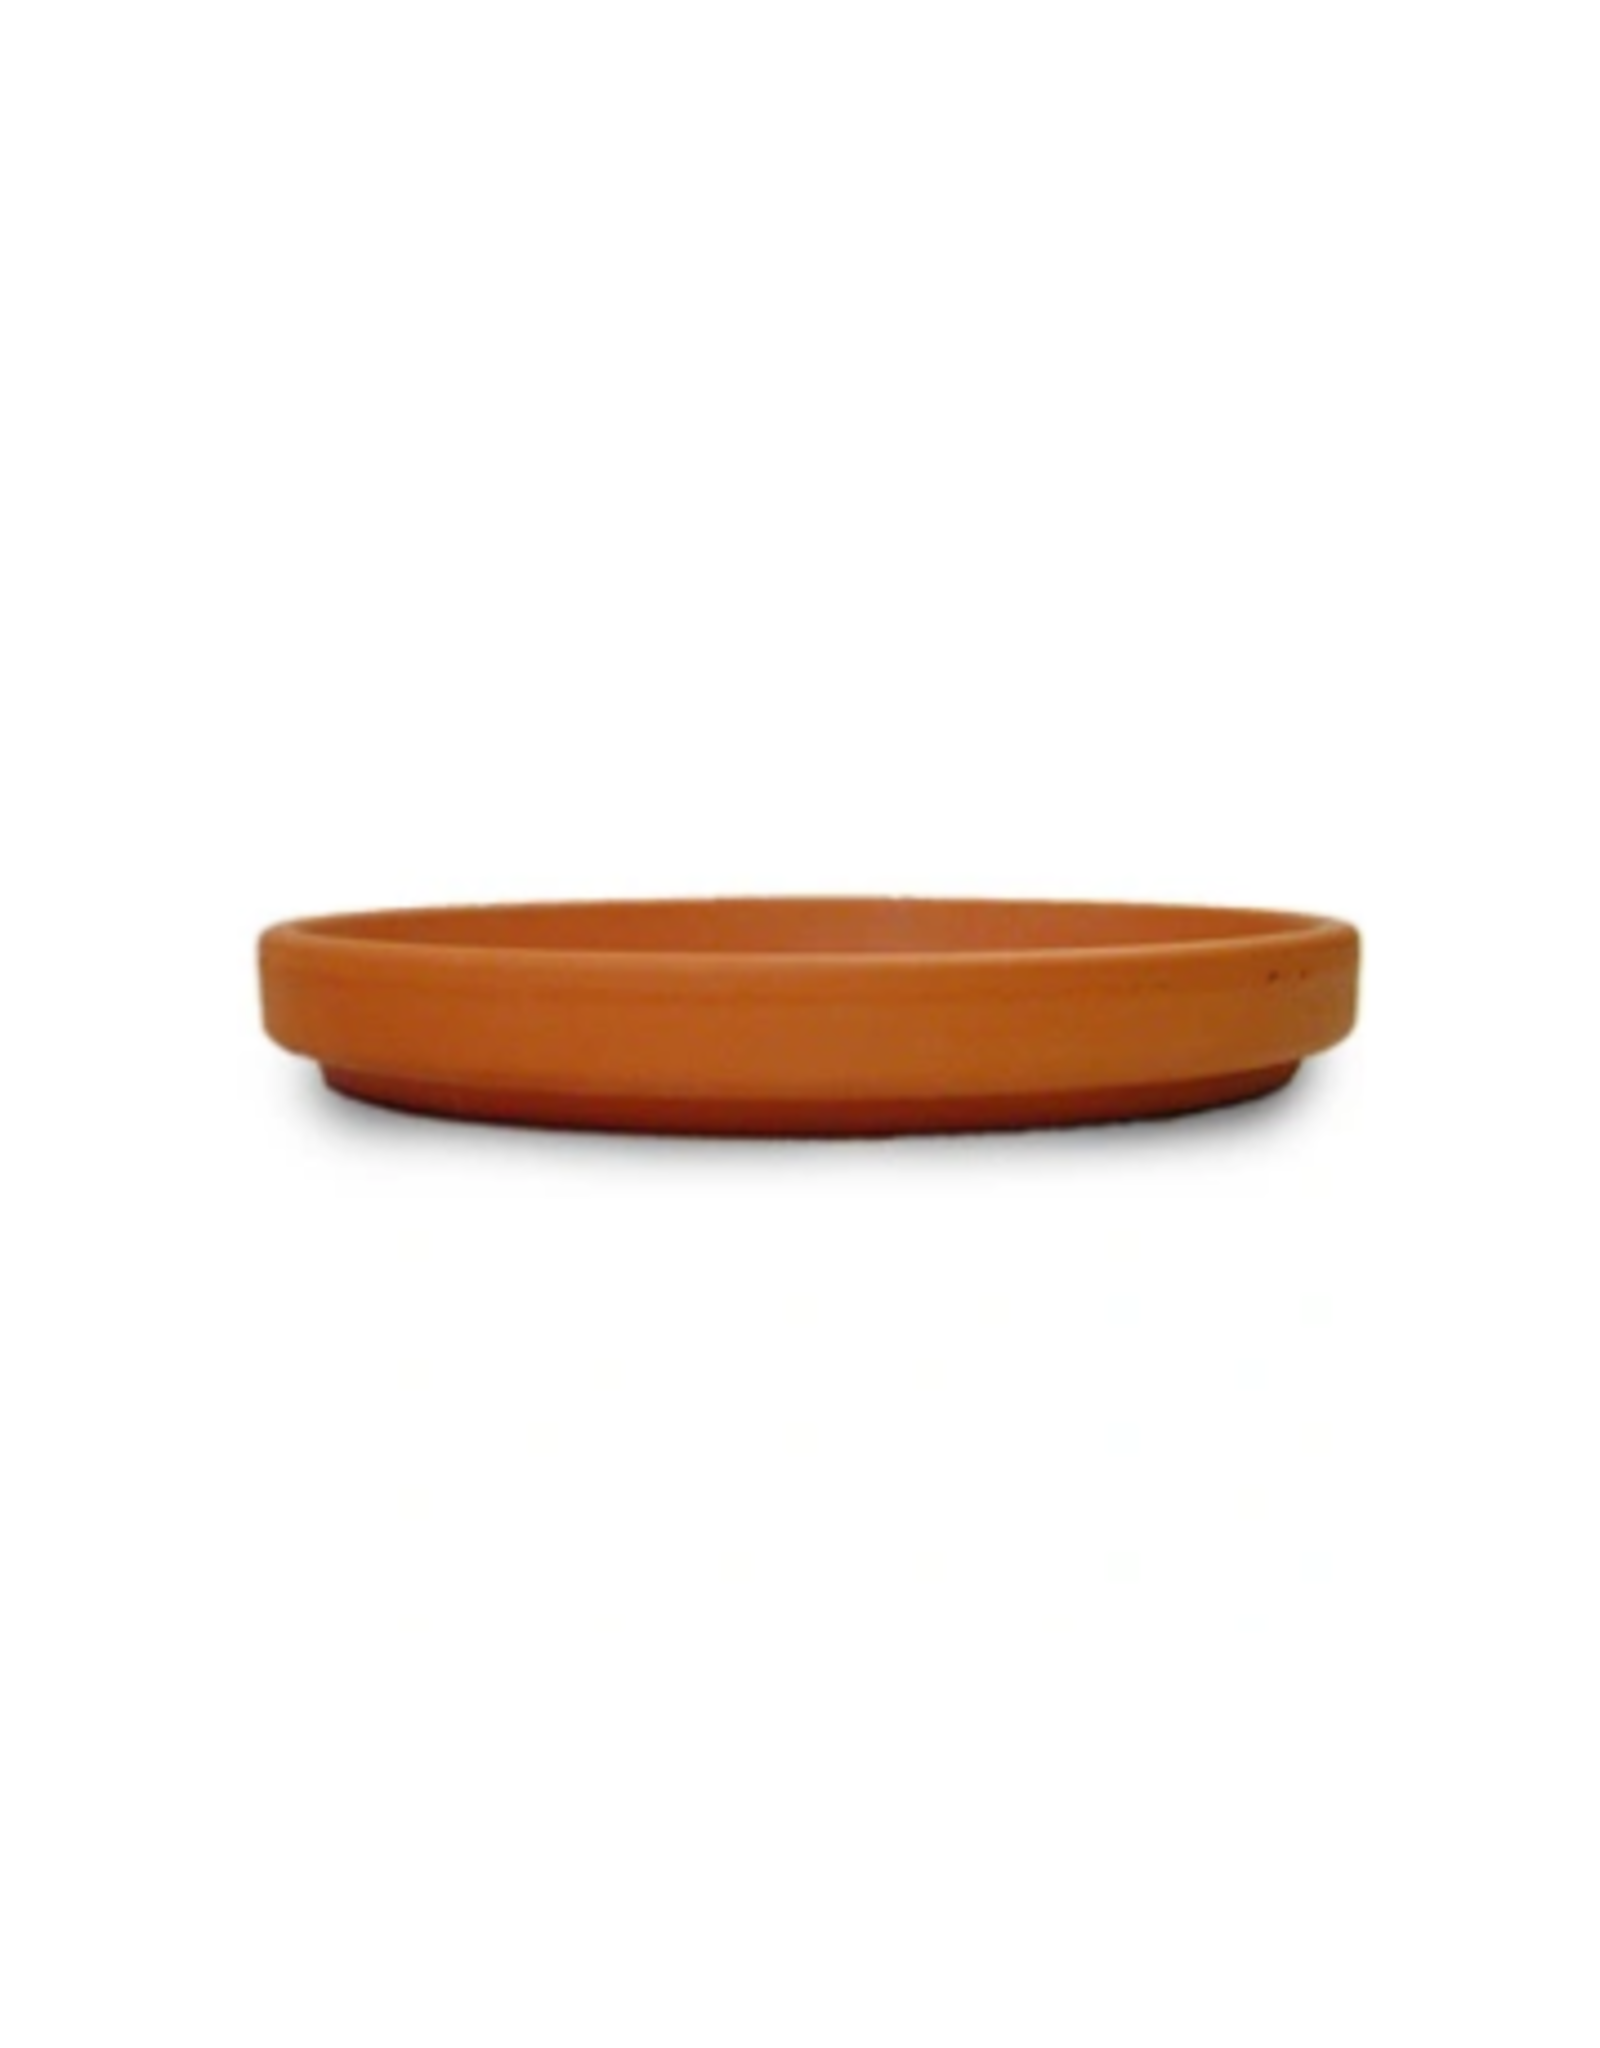 Terra Cotta Saucer - Red Clay